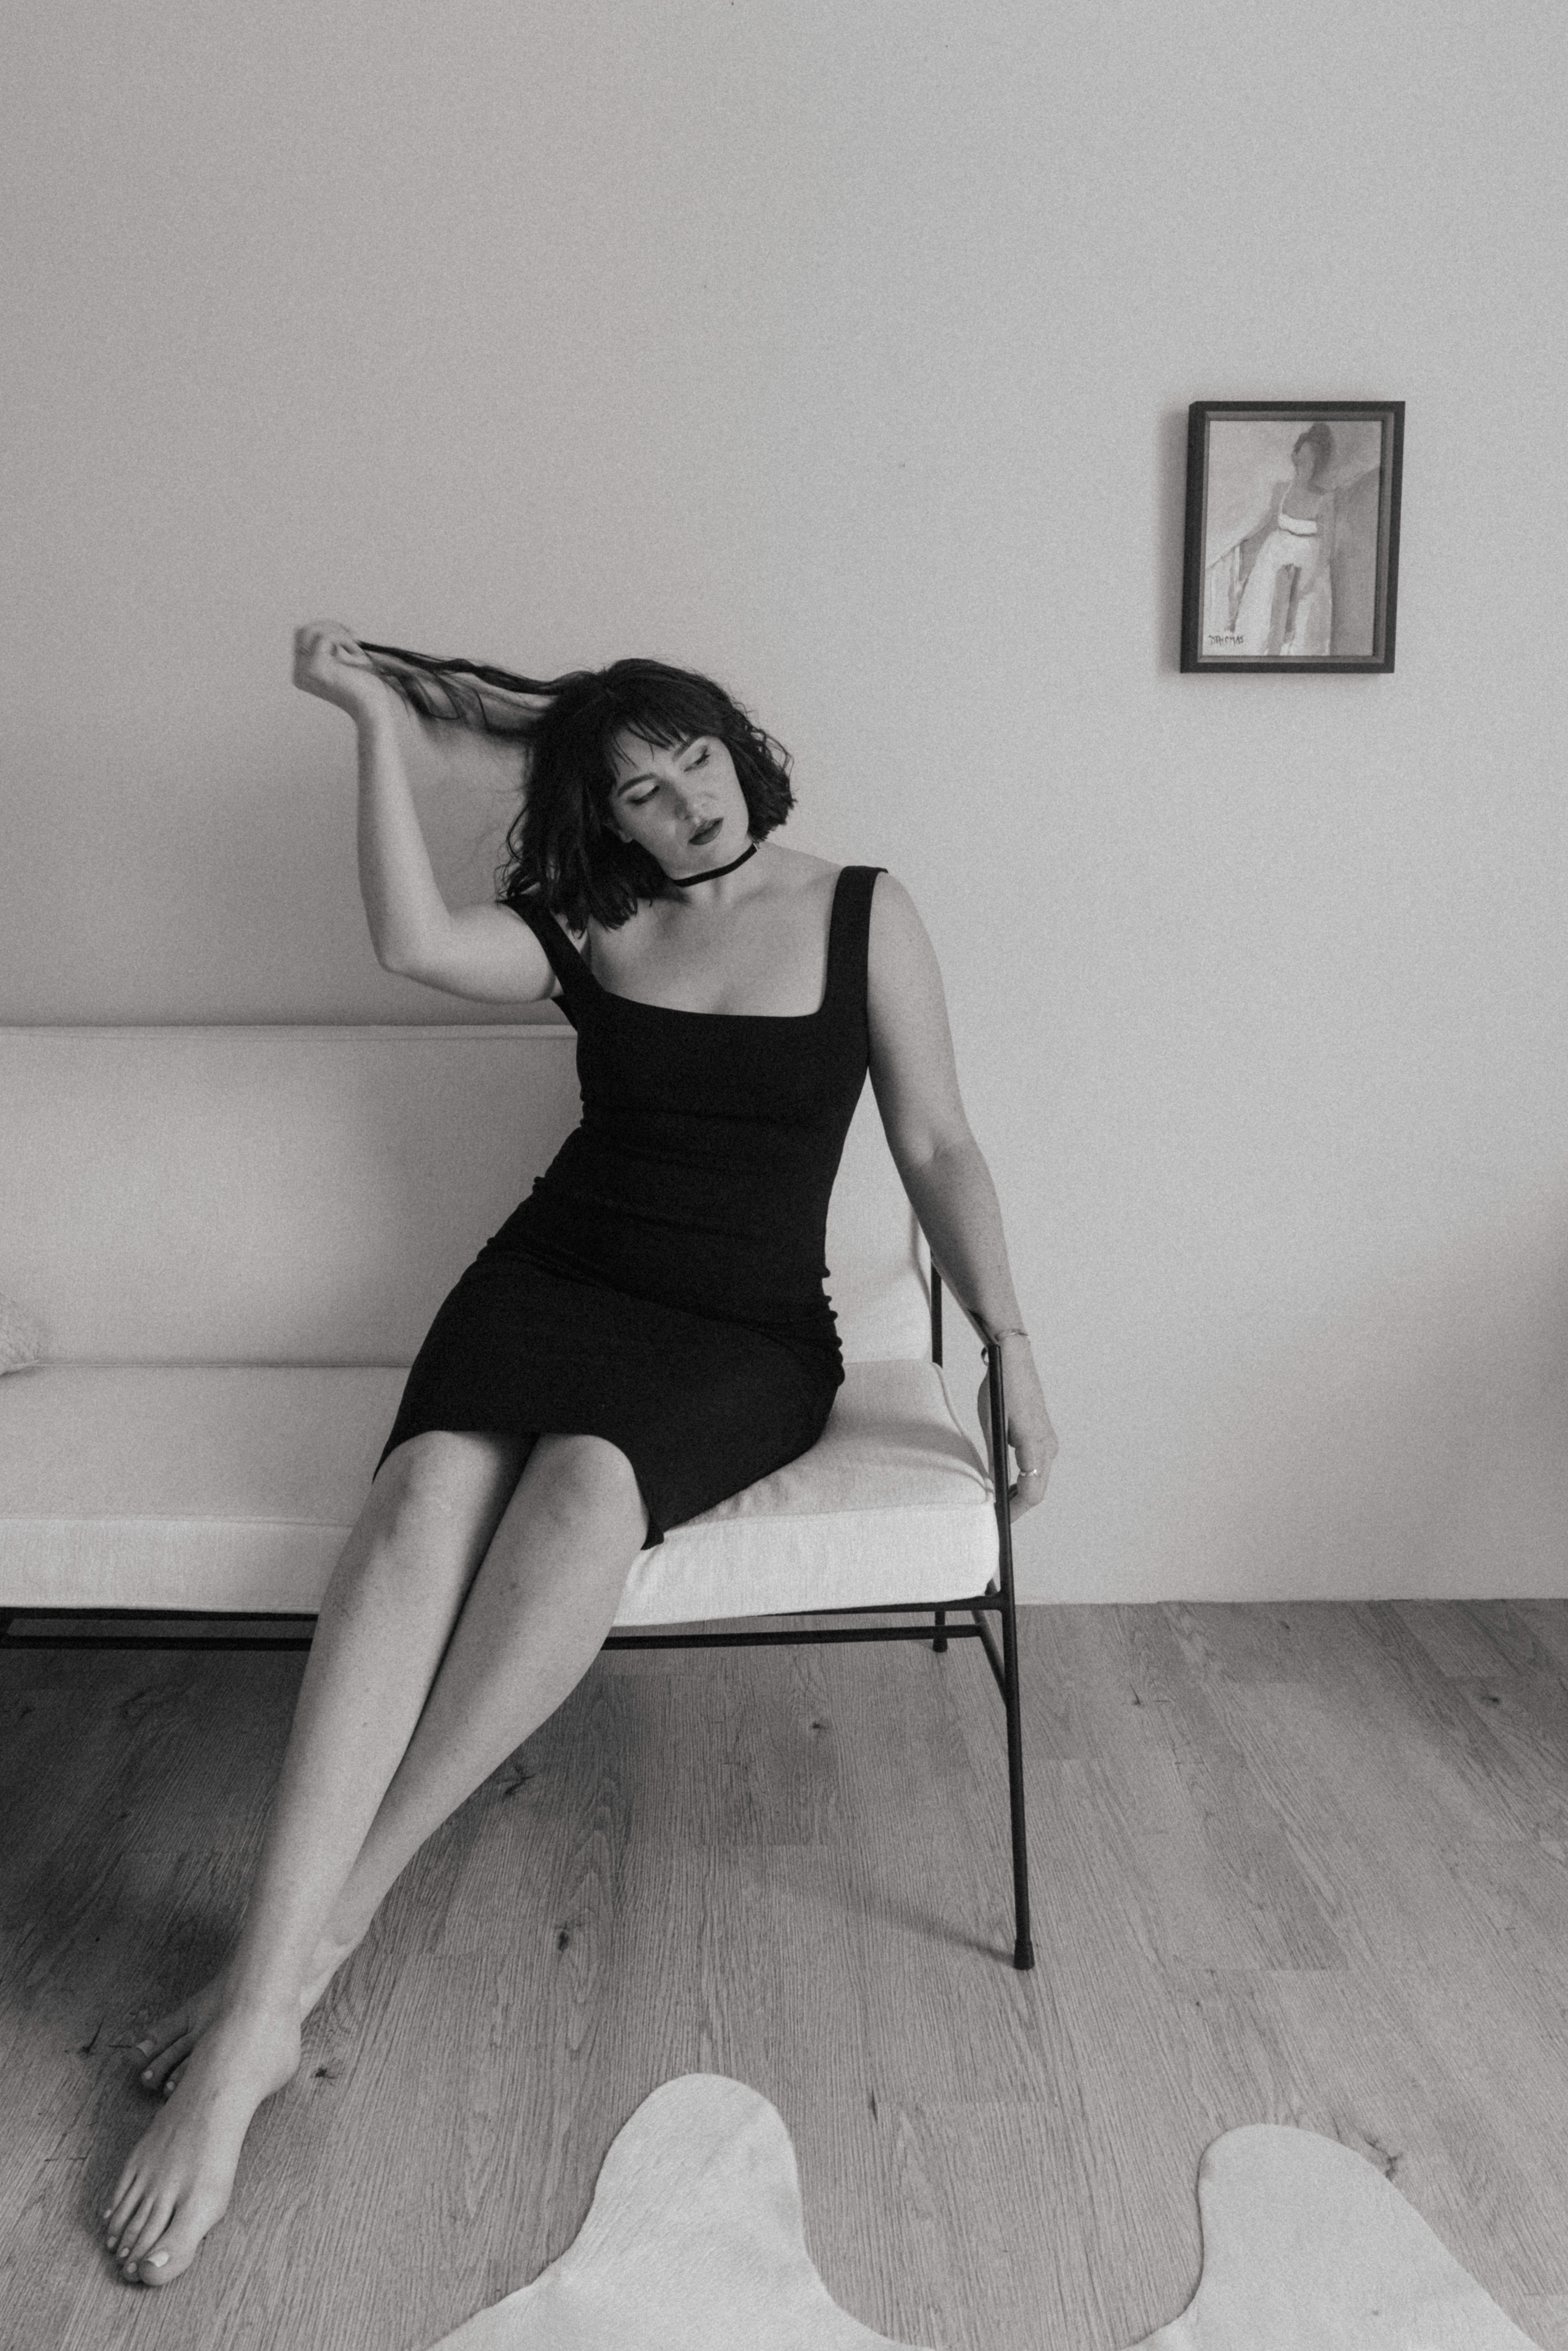 black and white of a woman in a black dress sitting on a couch playing with her hair